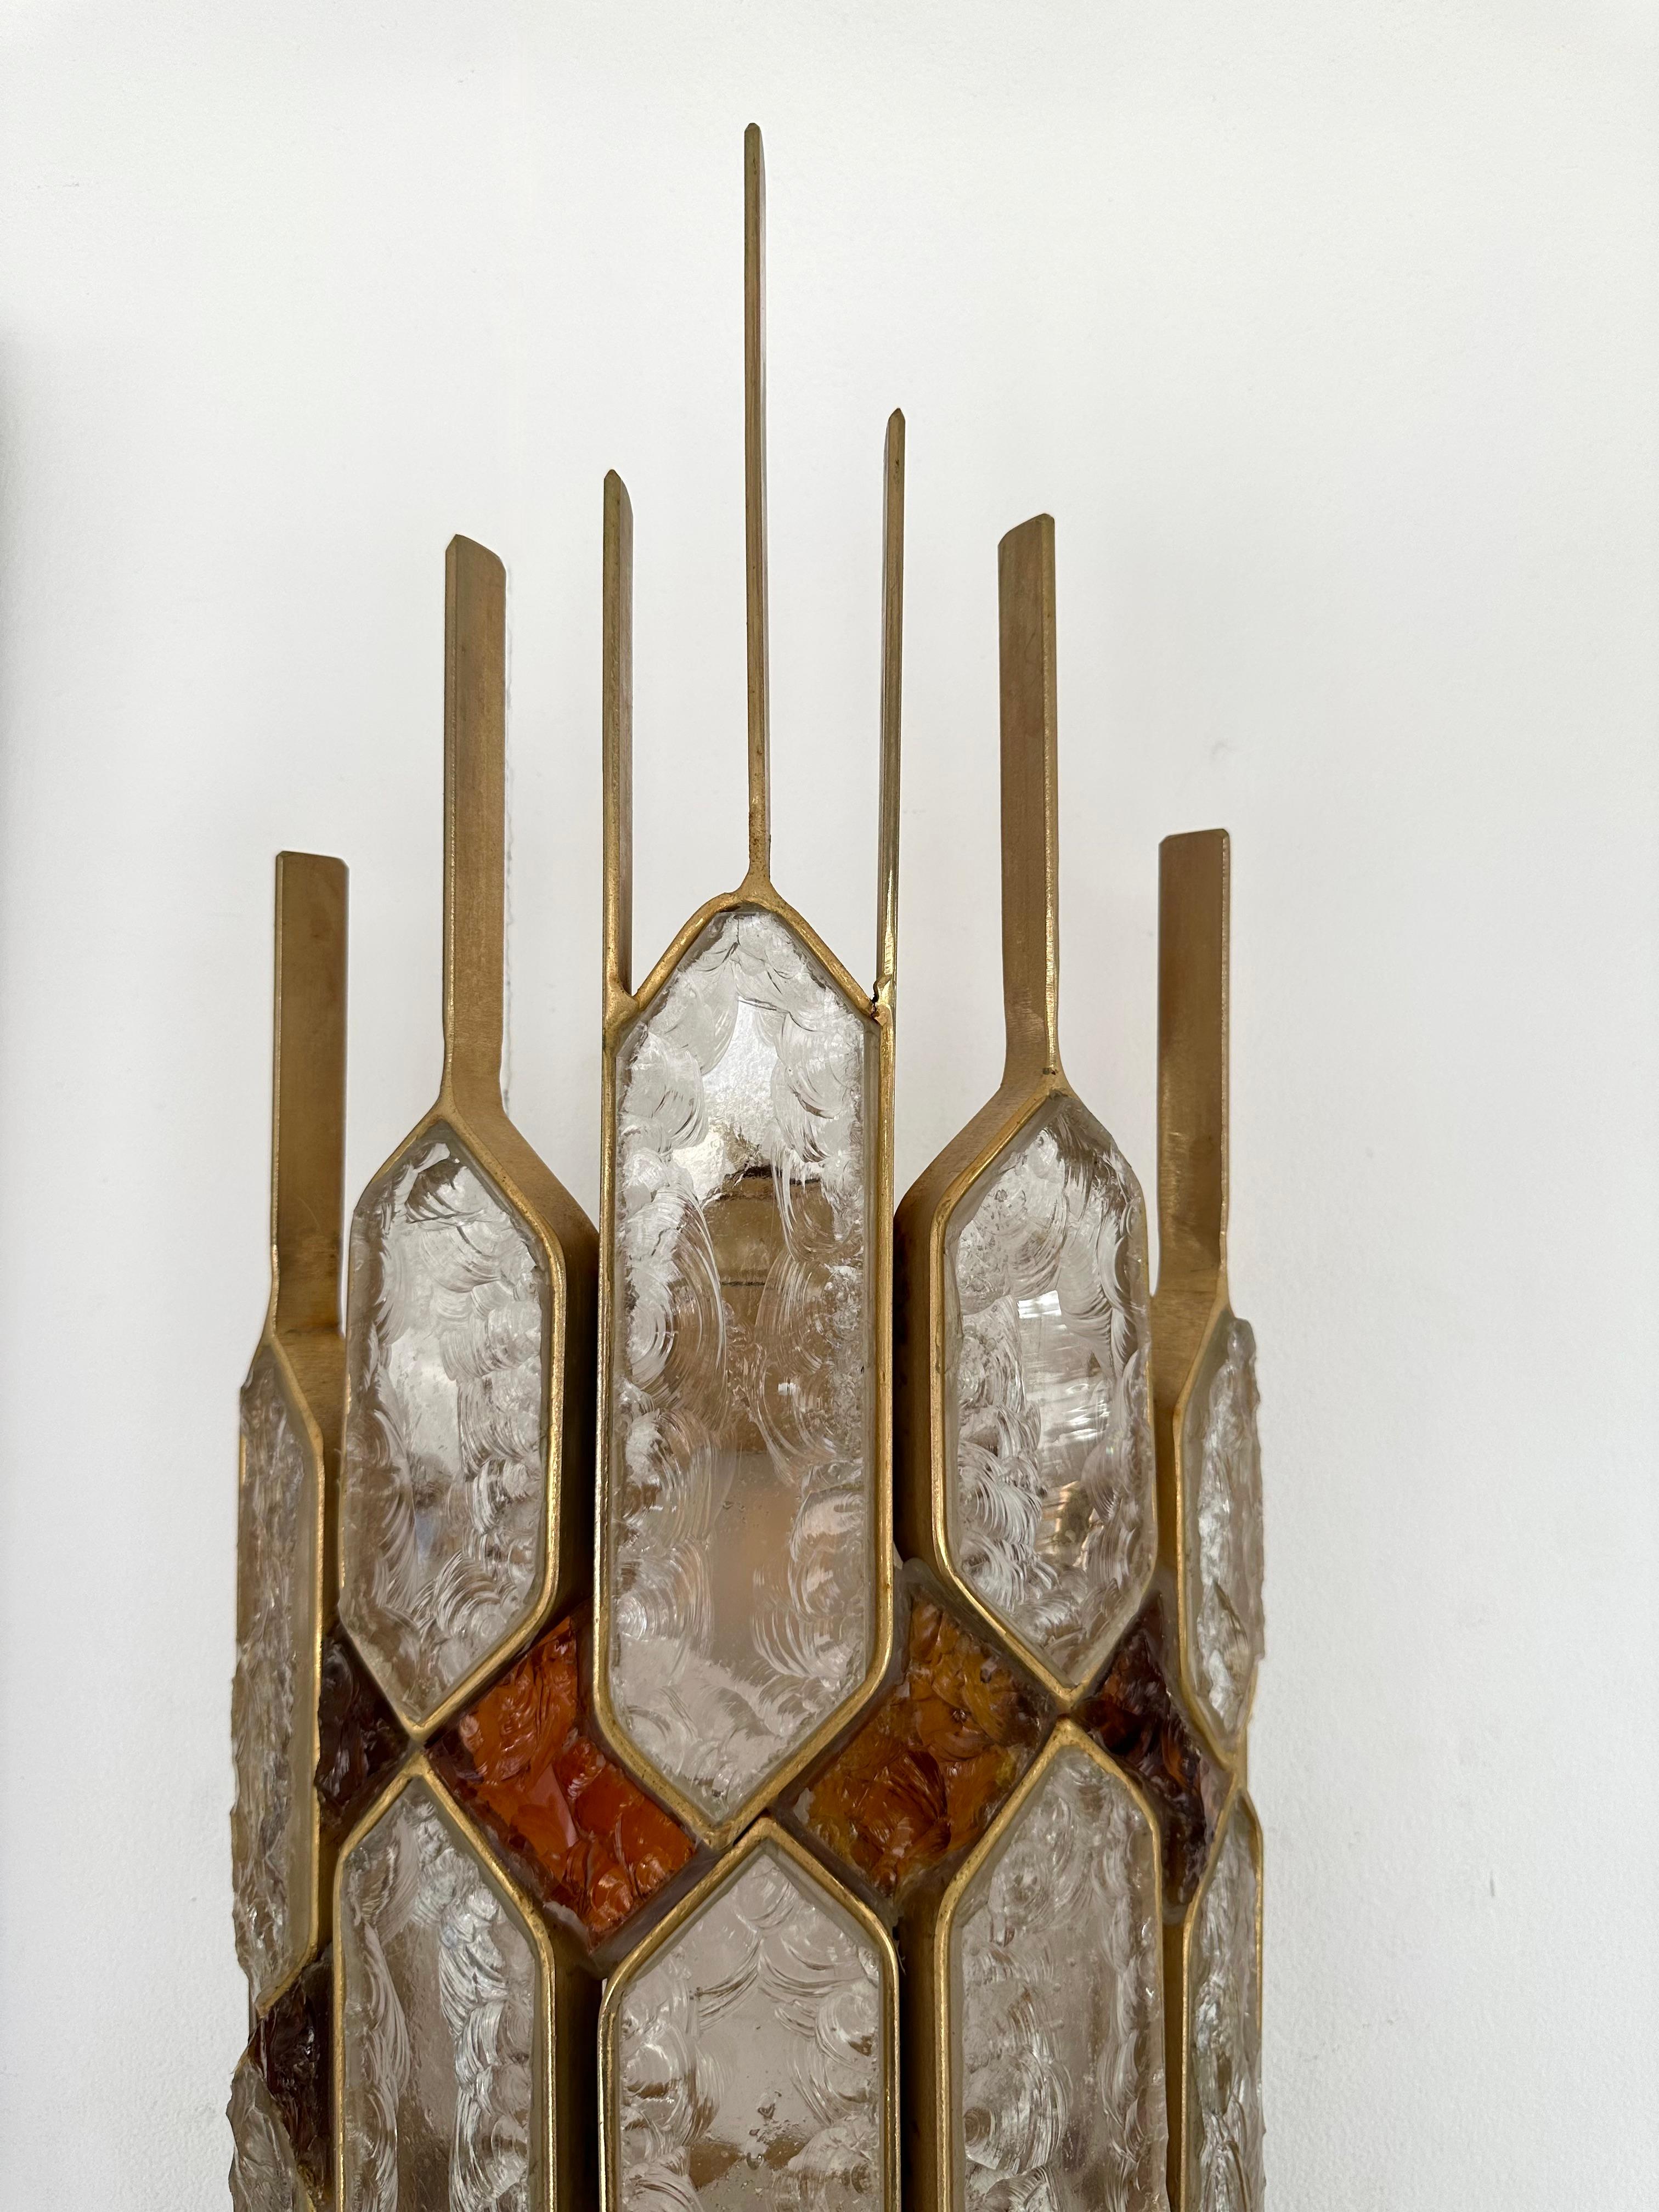 Large Pair of Hammered Glass Gilt Wrought Iron Sconces by Longobard, Italy 1970s For Sale 1